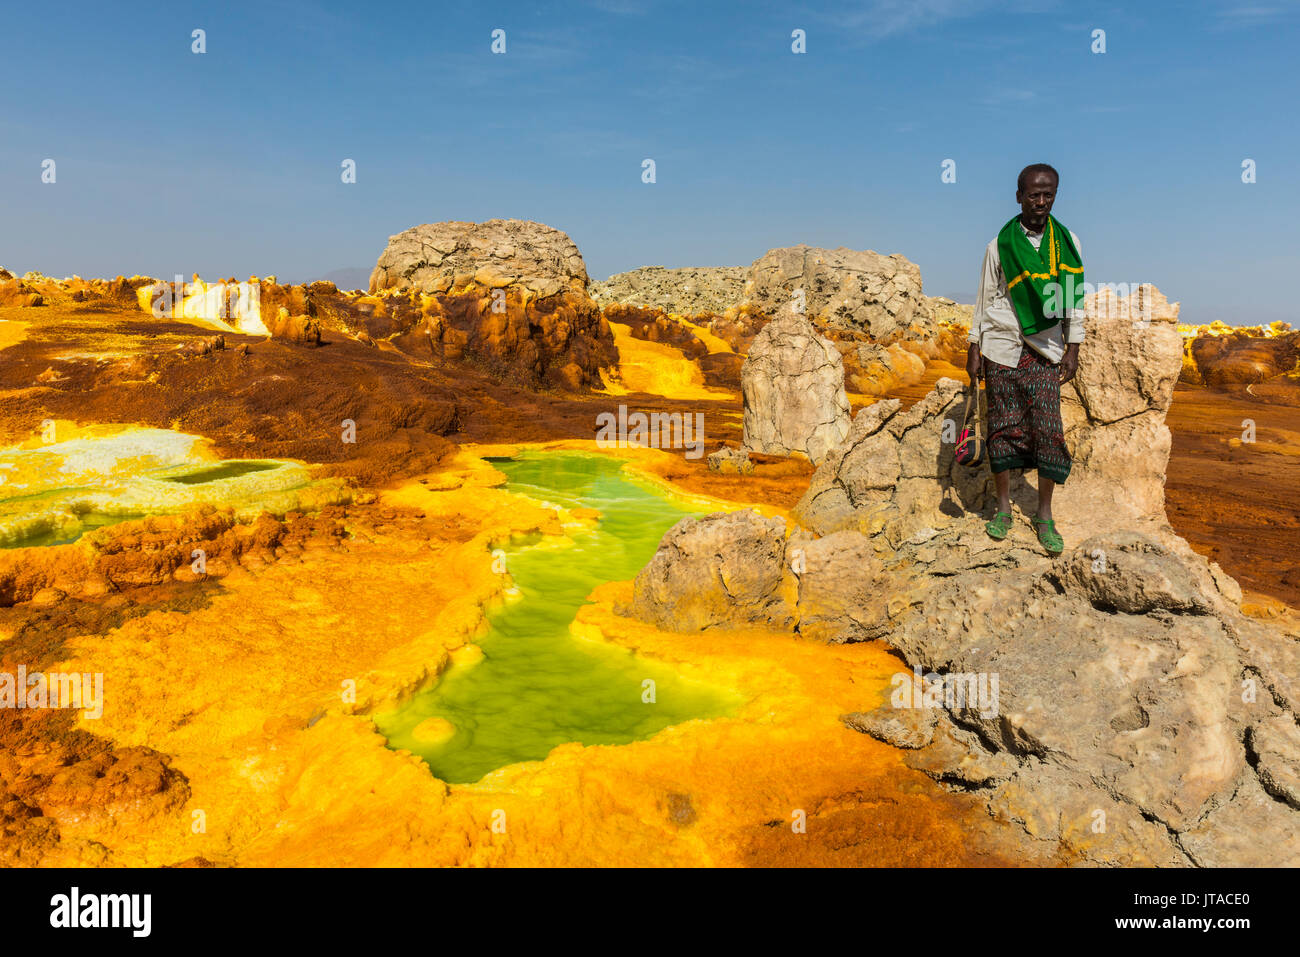 Colourful springs of acid in Dallol, hottest place on earth, Danakil depression, Ethiopia, Africa Stock Photo